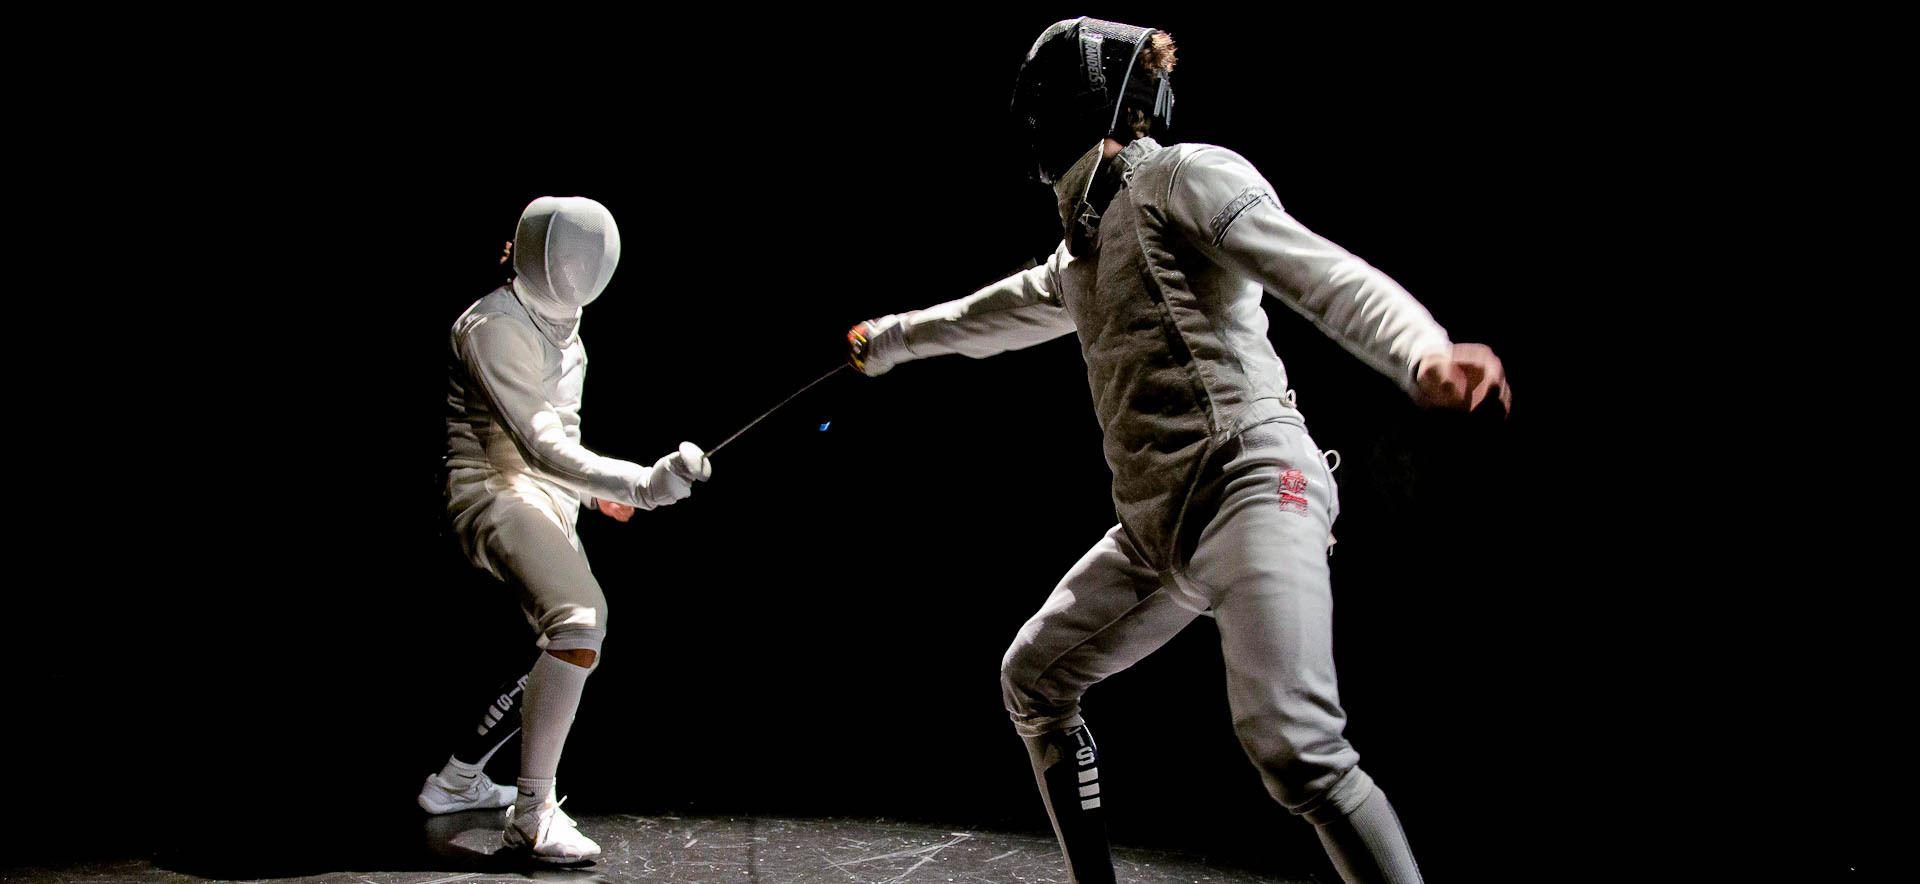 Two fencers in a duel